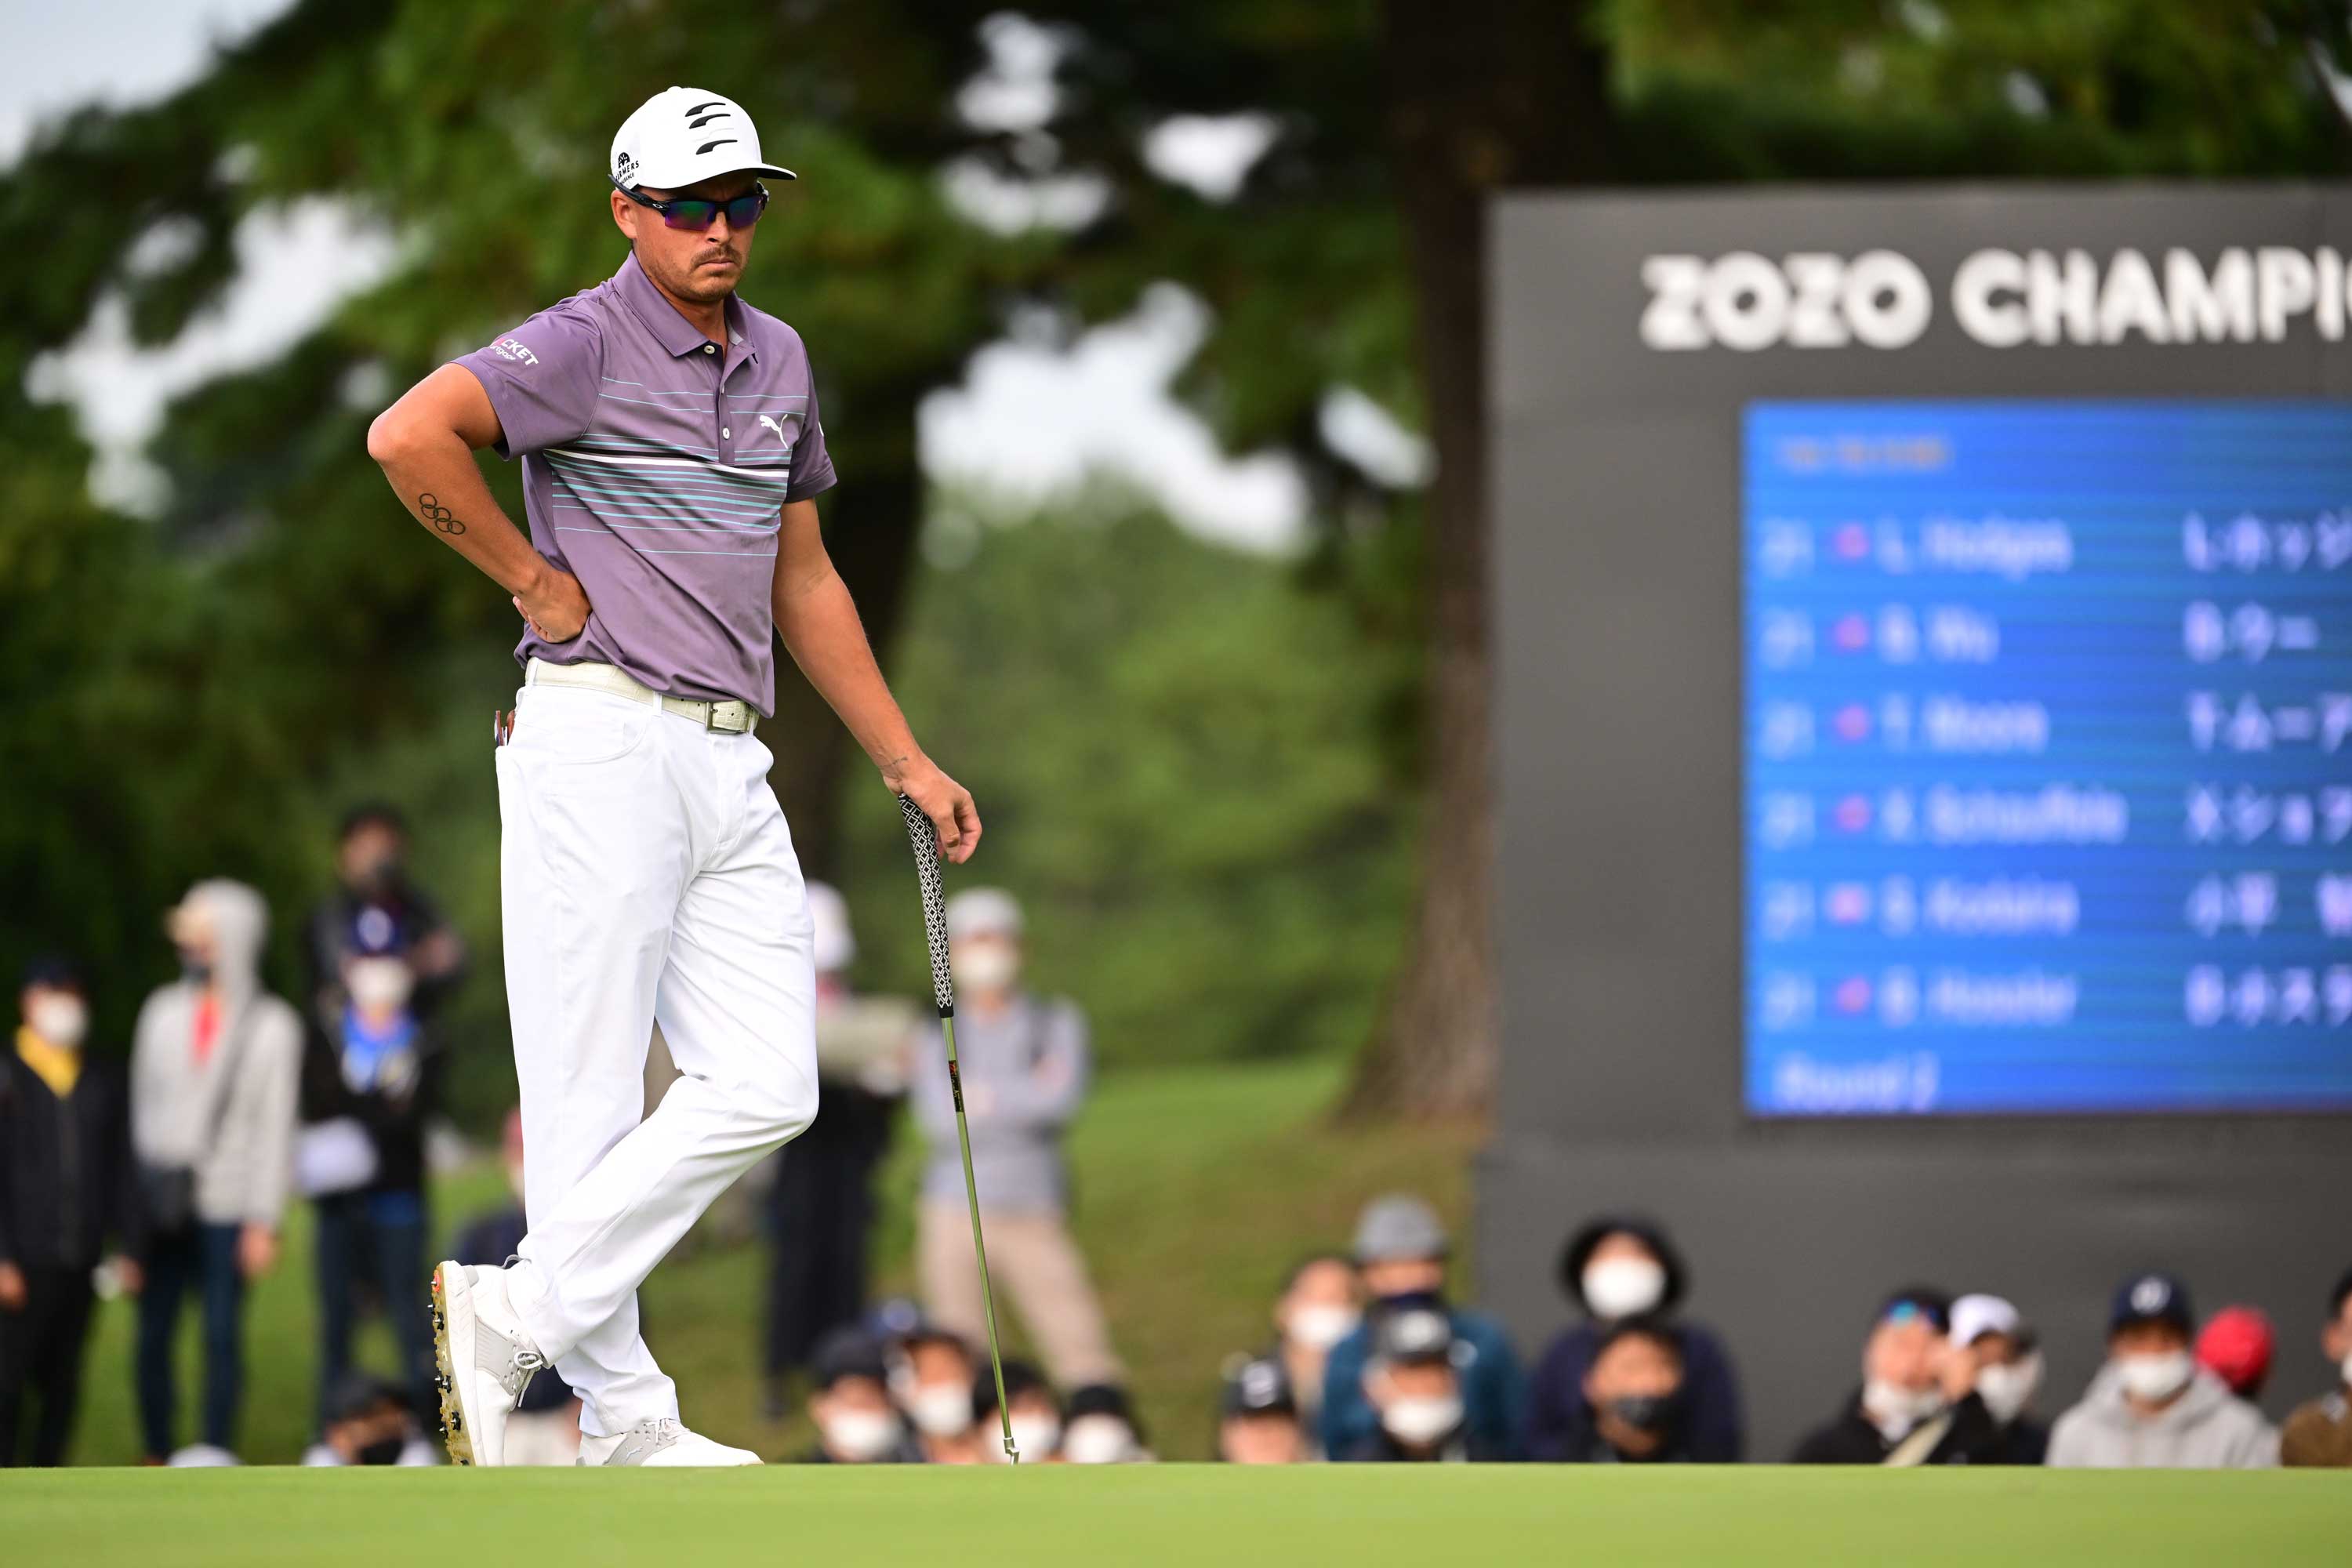 Rickie Fowler nearly shoots career-best PGA Tour score, tied for 36-hole lead at Zozo Championship Golf News and Tour Information GolfDigest